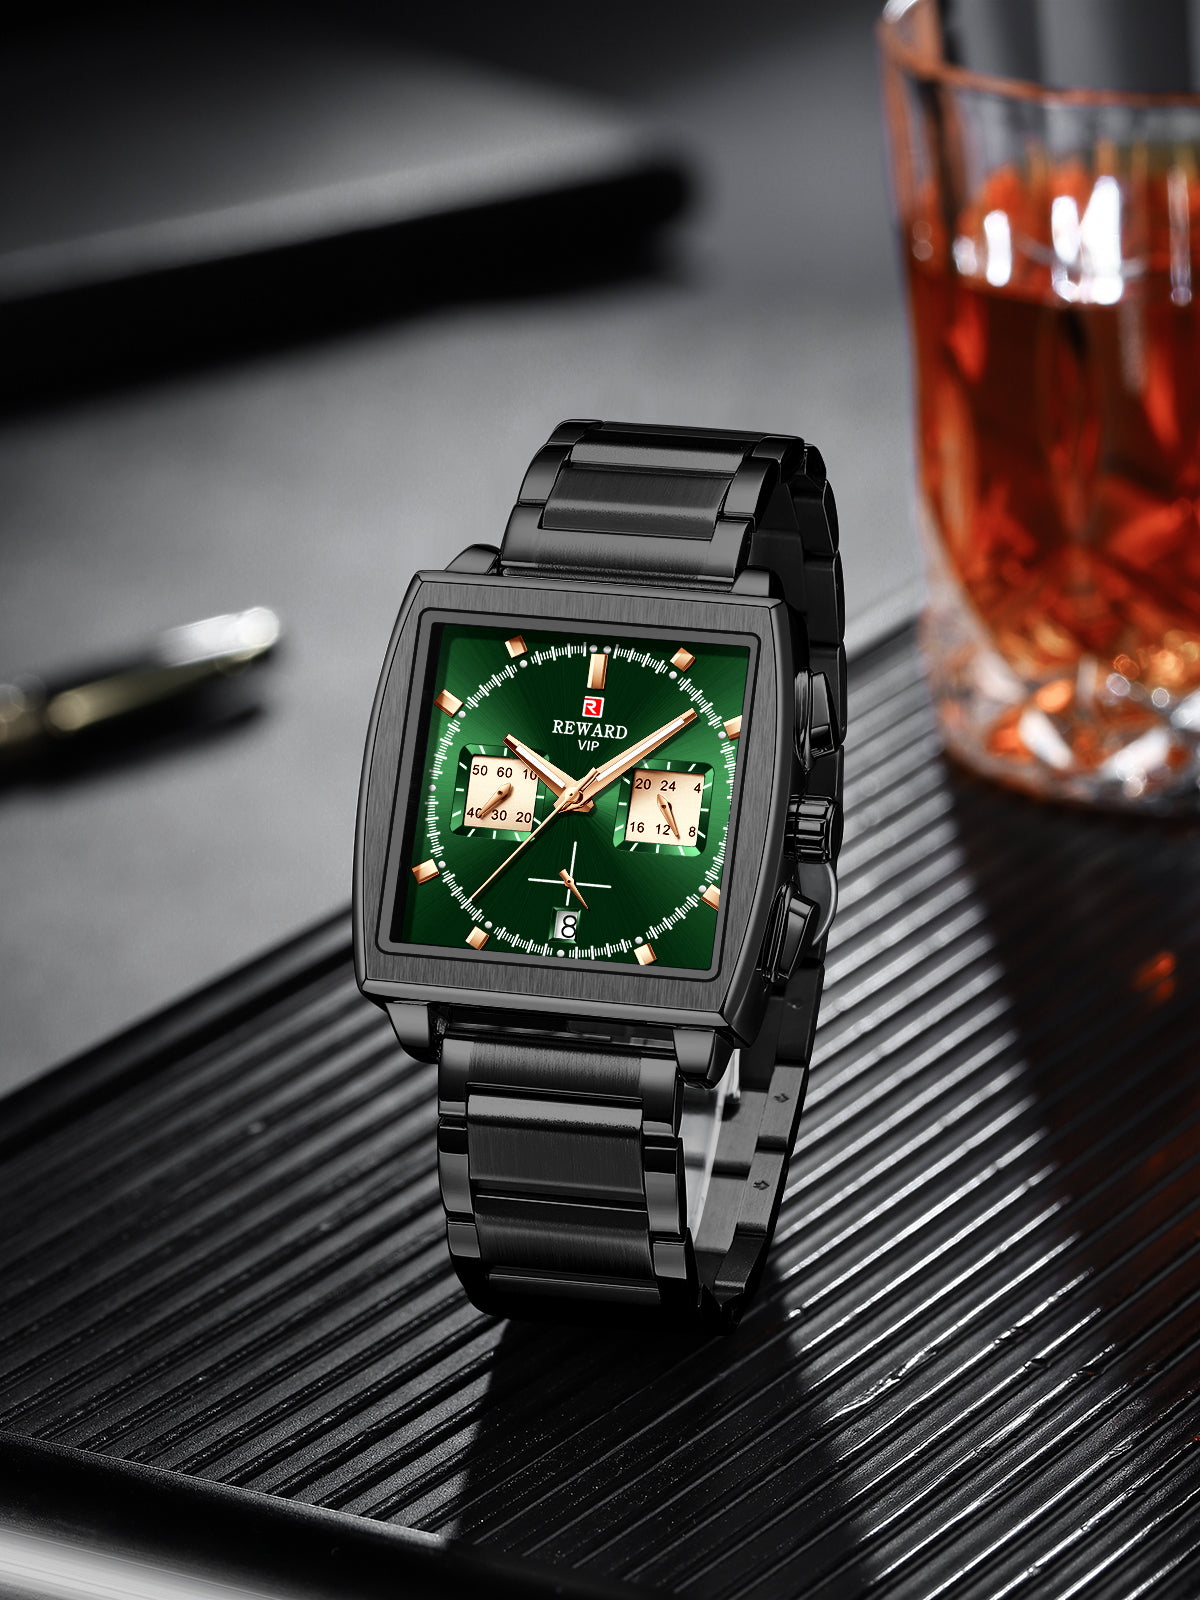 Lexus Multifunction Watch Steel, Black and Green colour